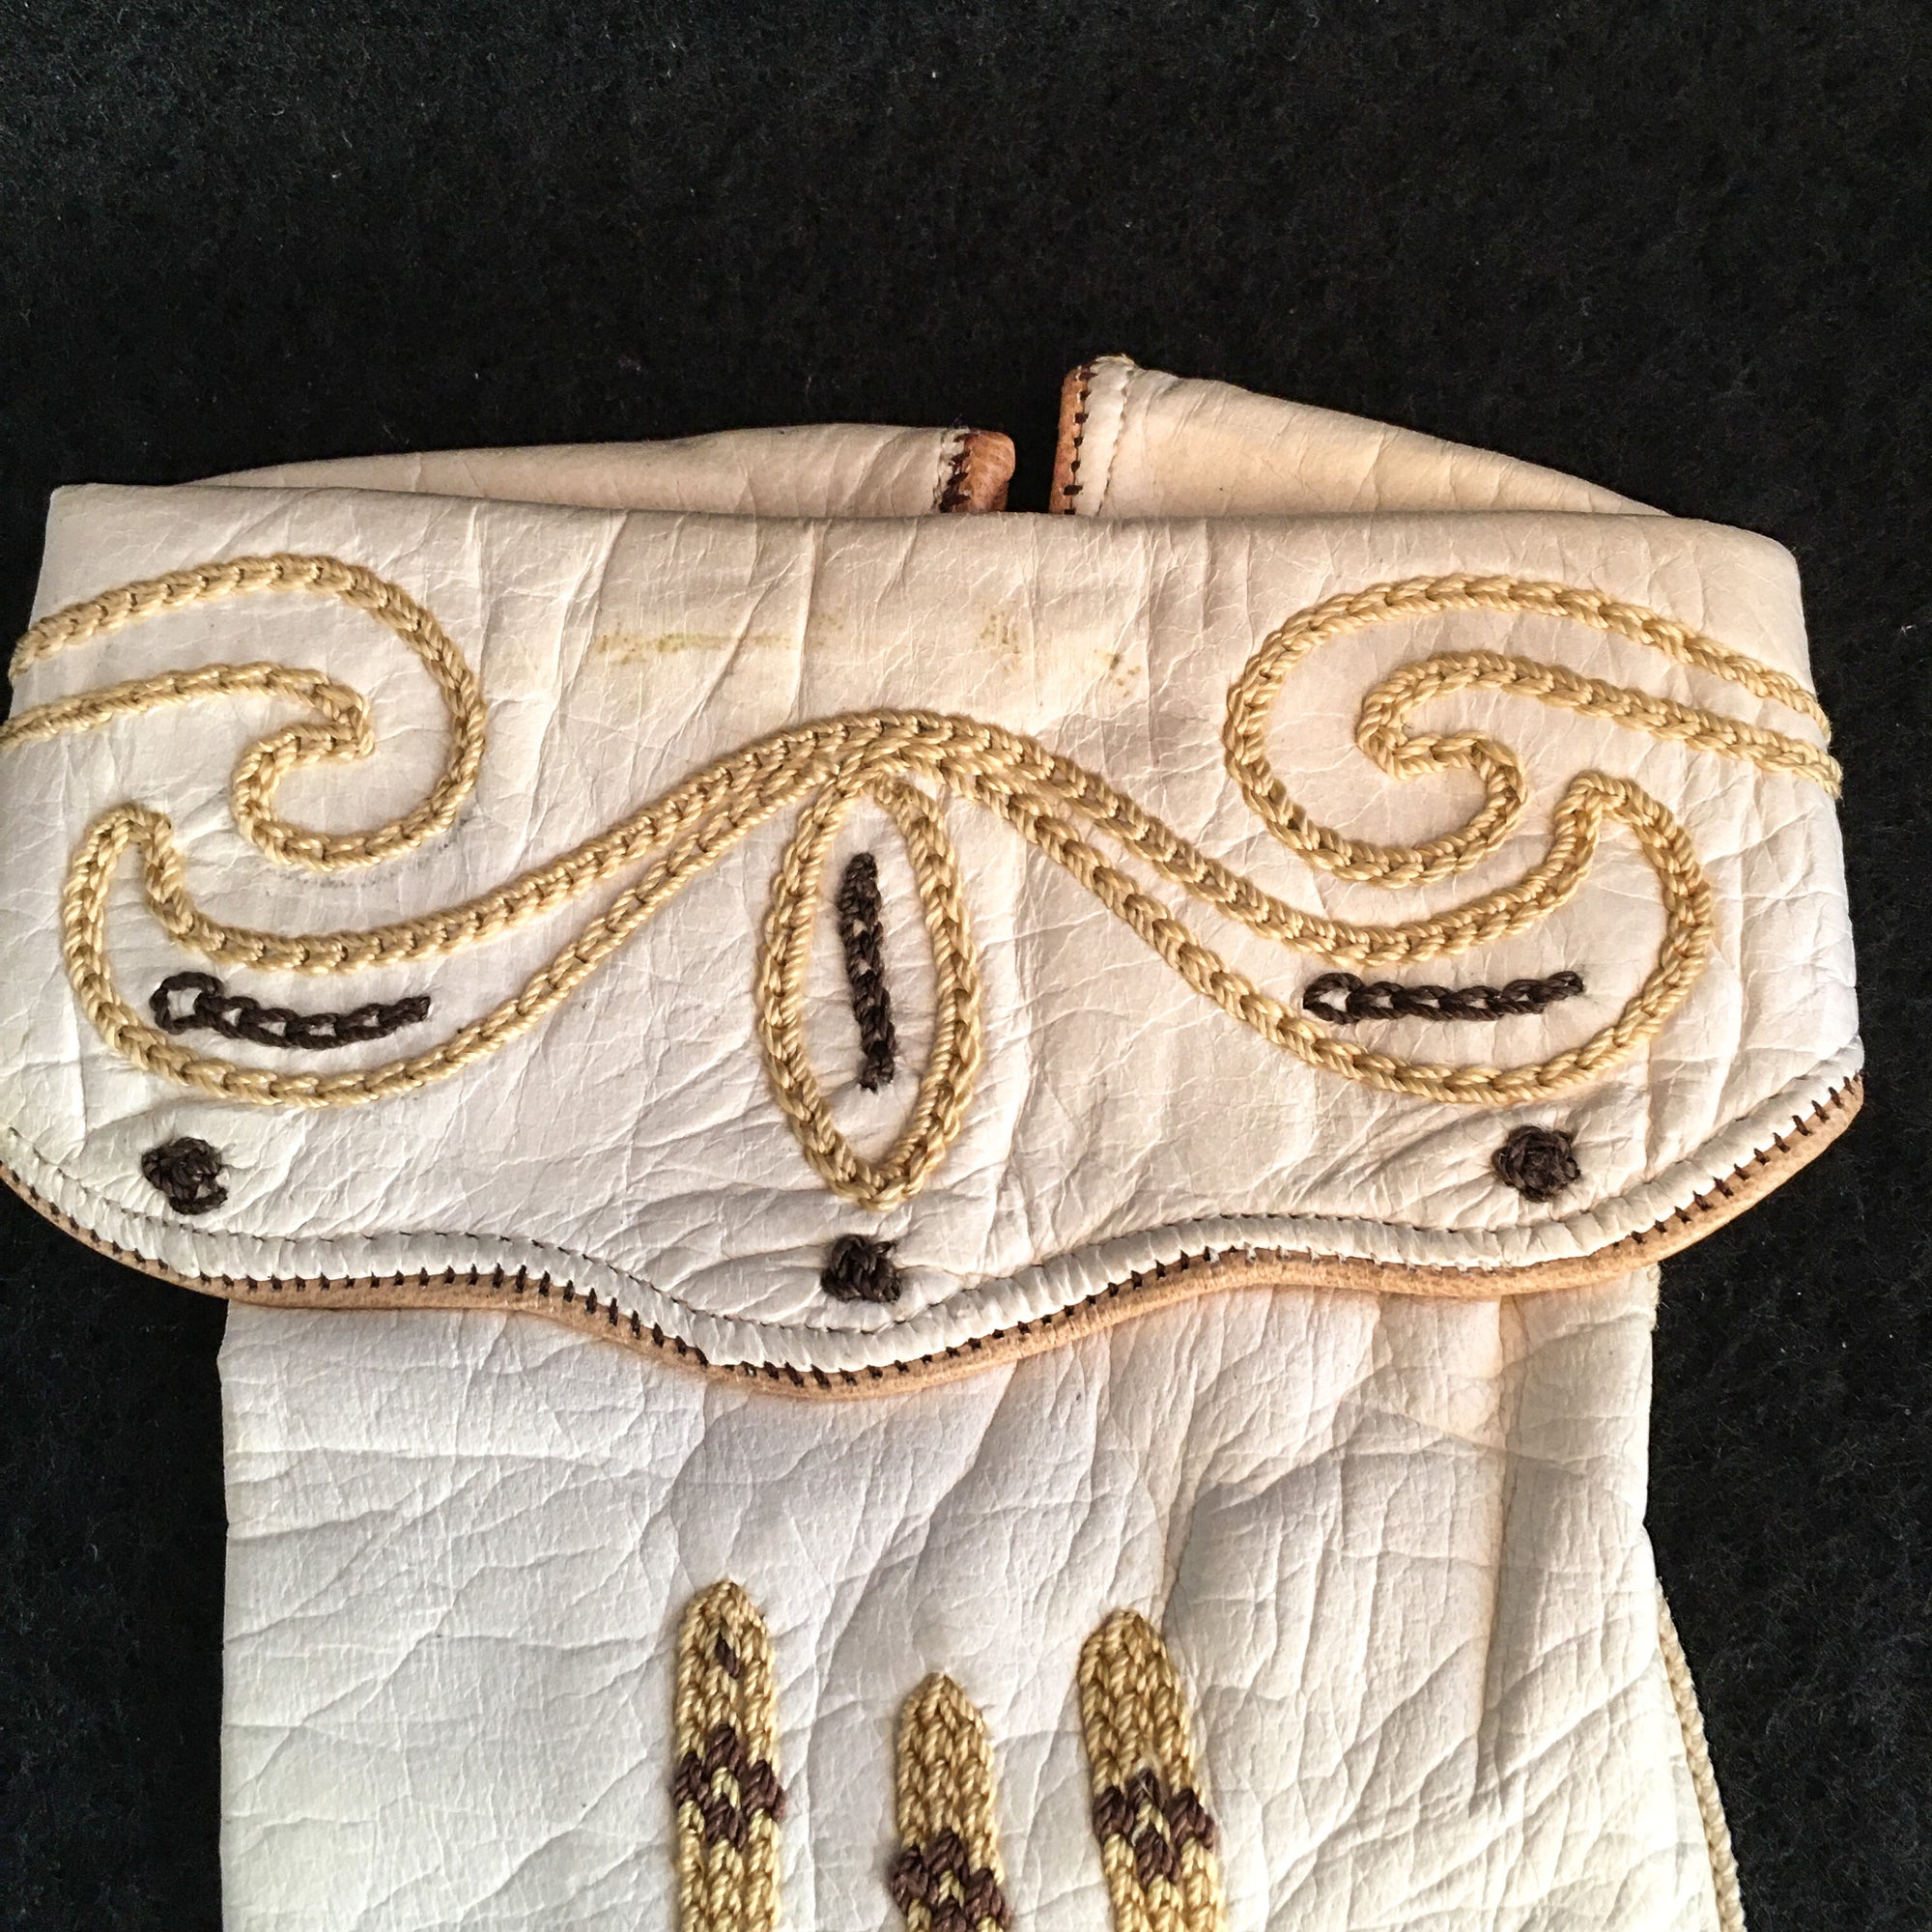 Early 1900’s Embroidered Leather Gloves, “Aris” Size 5 ¾